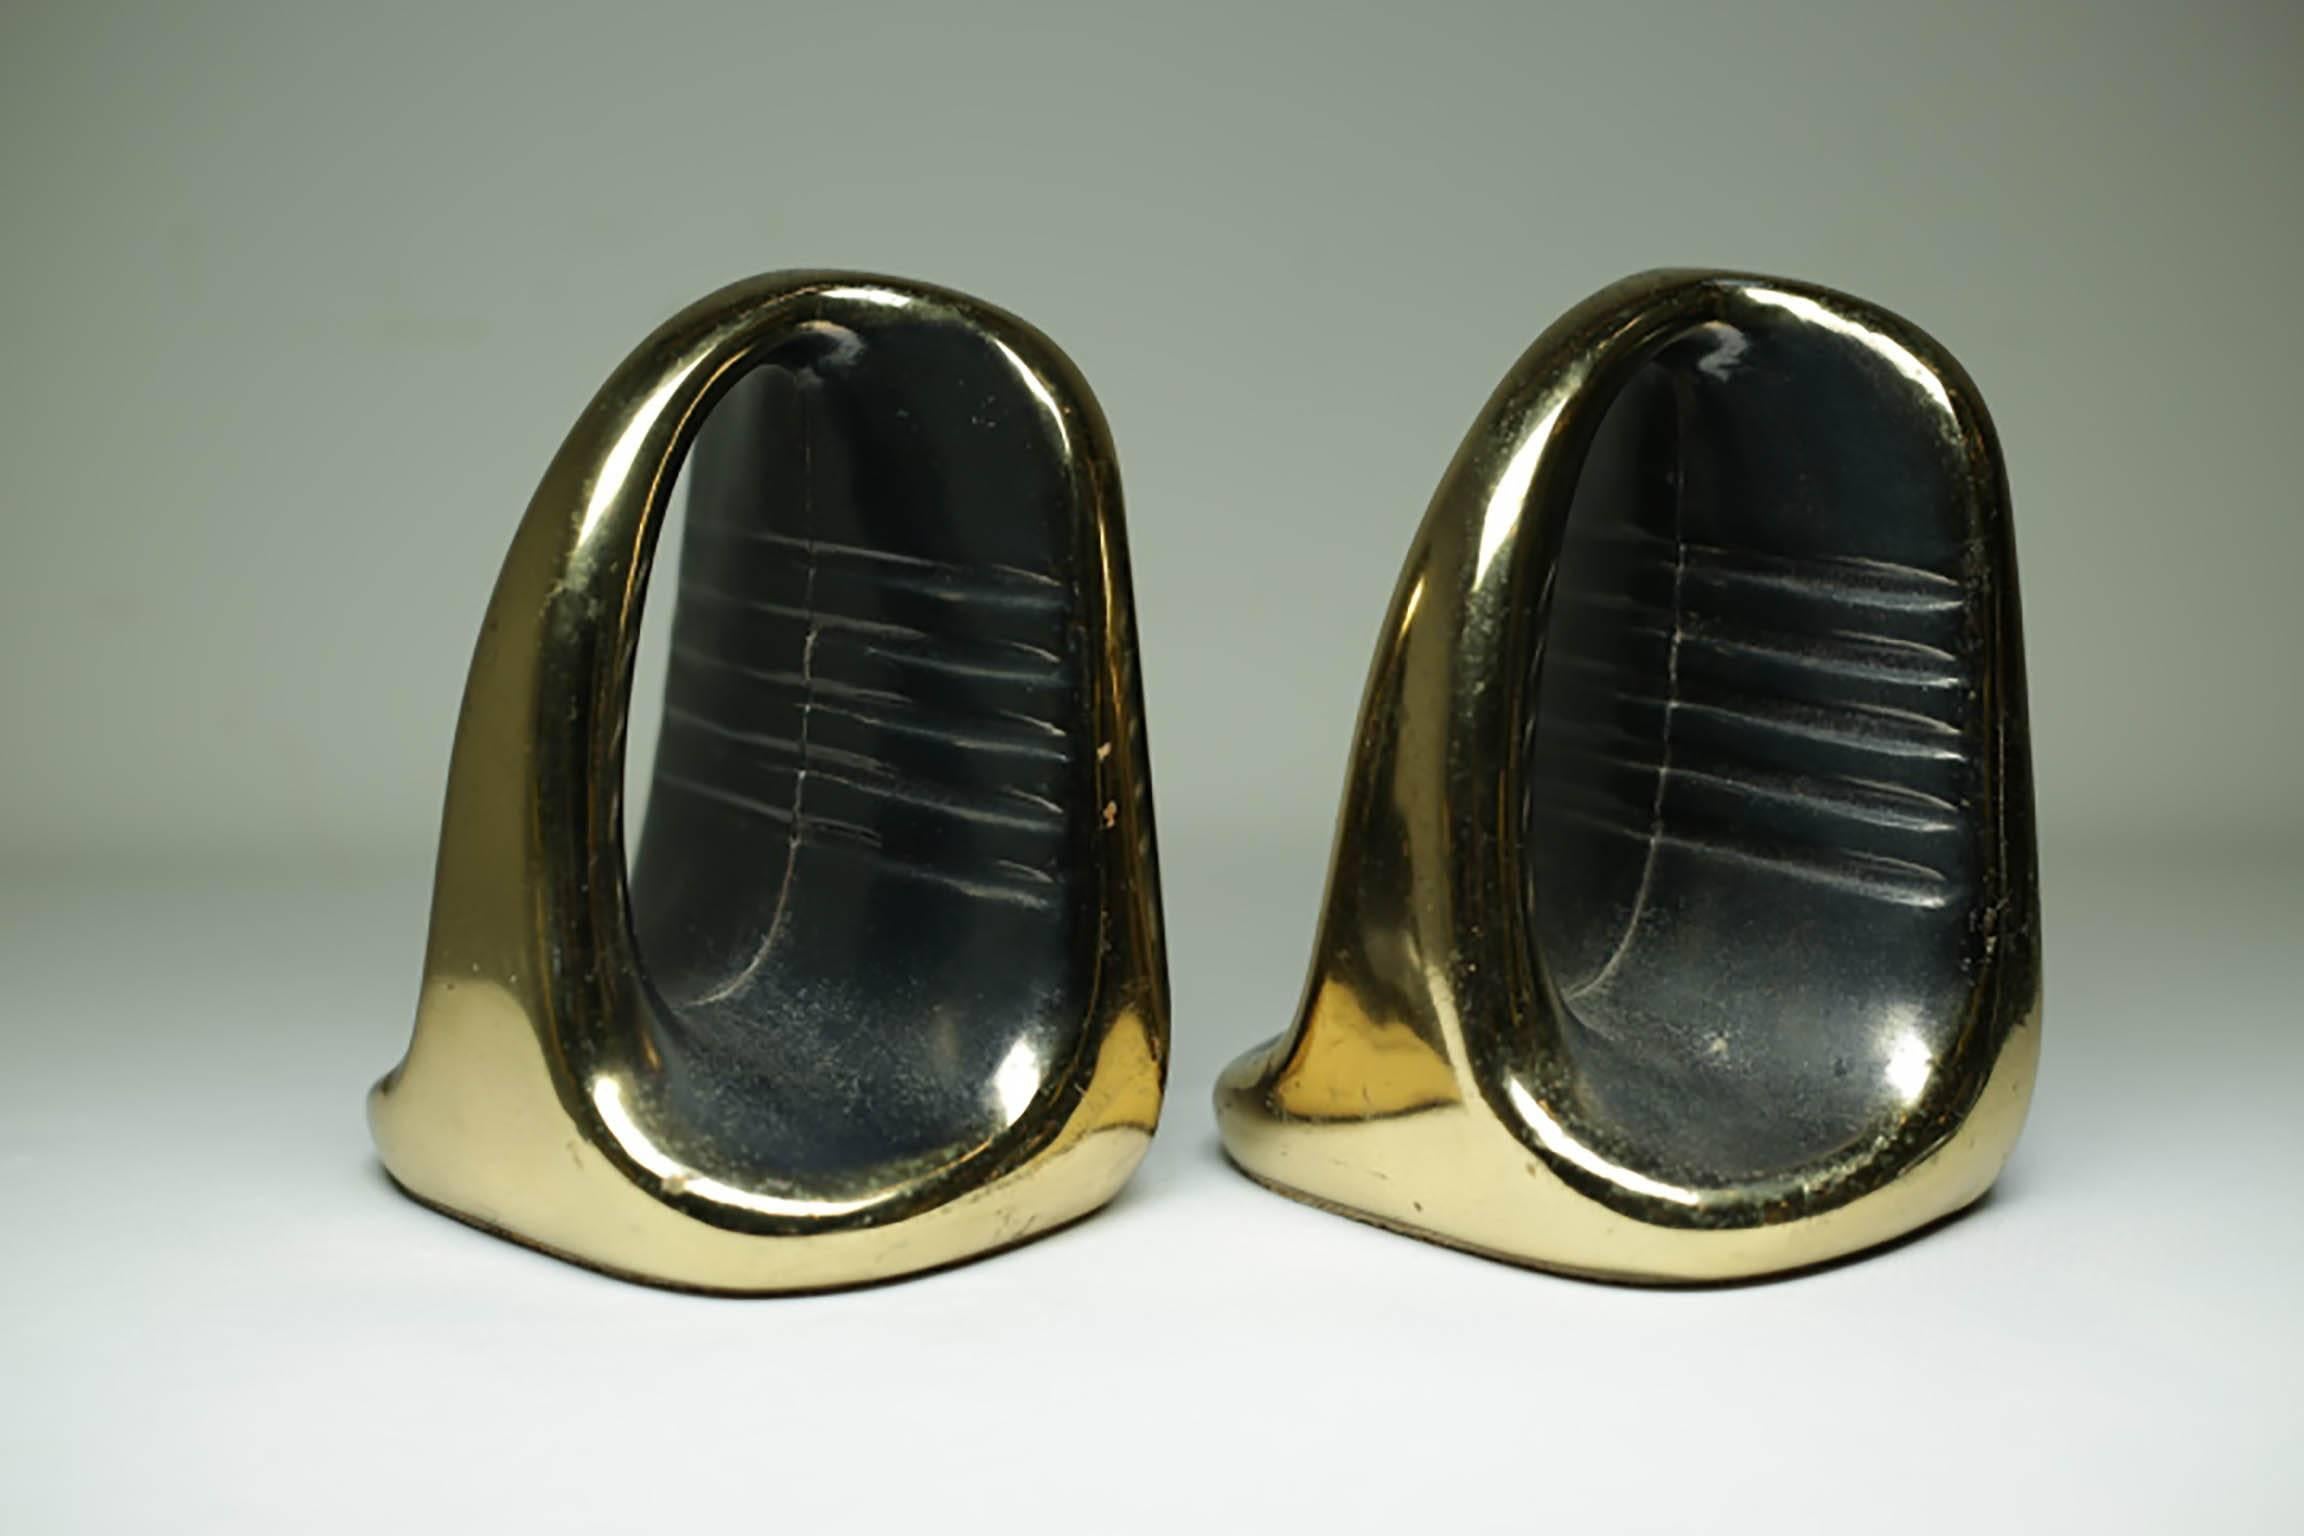 Pair of metal bookends, circa 1960s. Very light not solid.